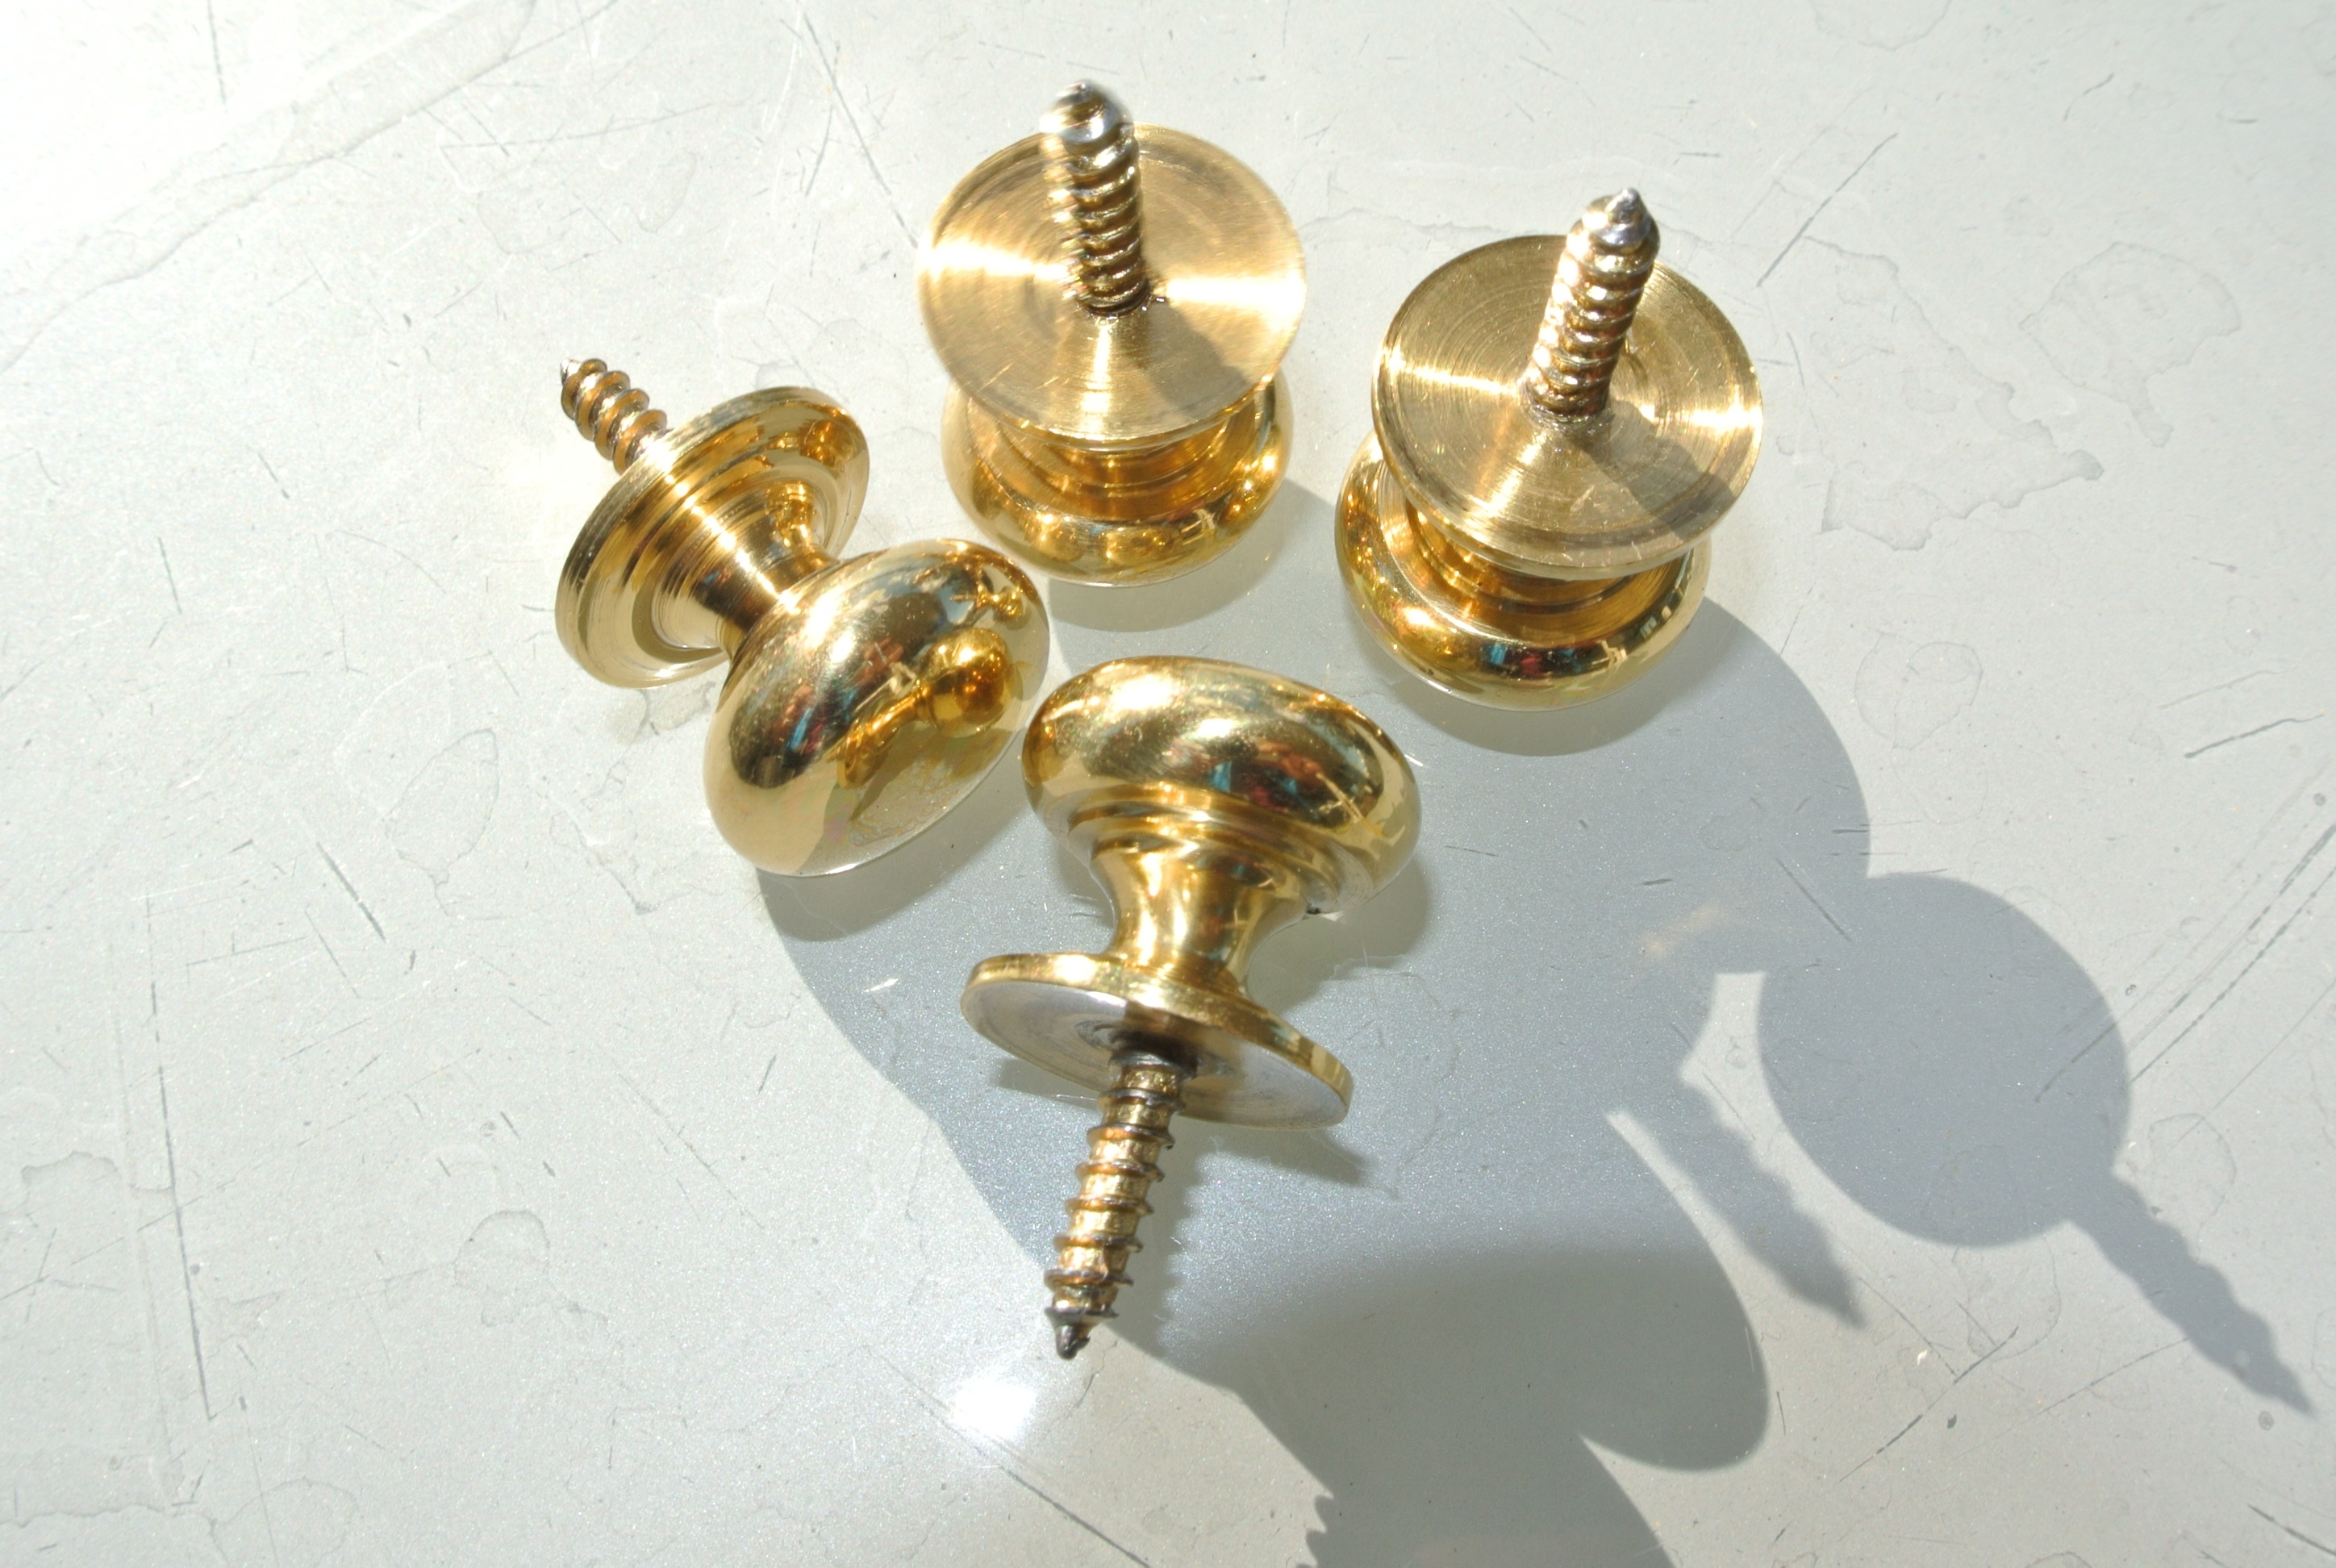 4 Very Small Screw Knobs Pulls Handles Antique Solid Heavy Brass regarding sizing 2896 X 1944